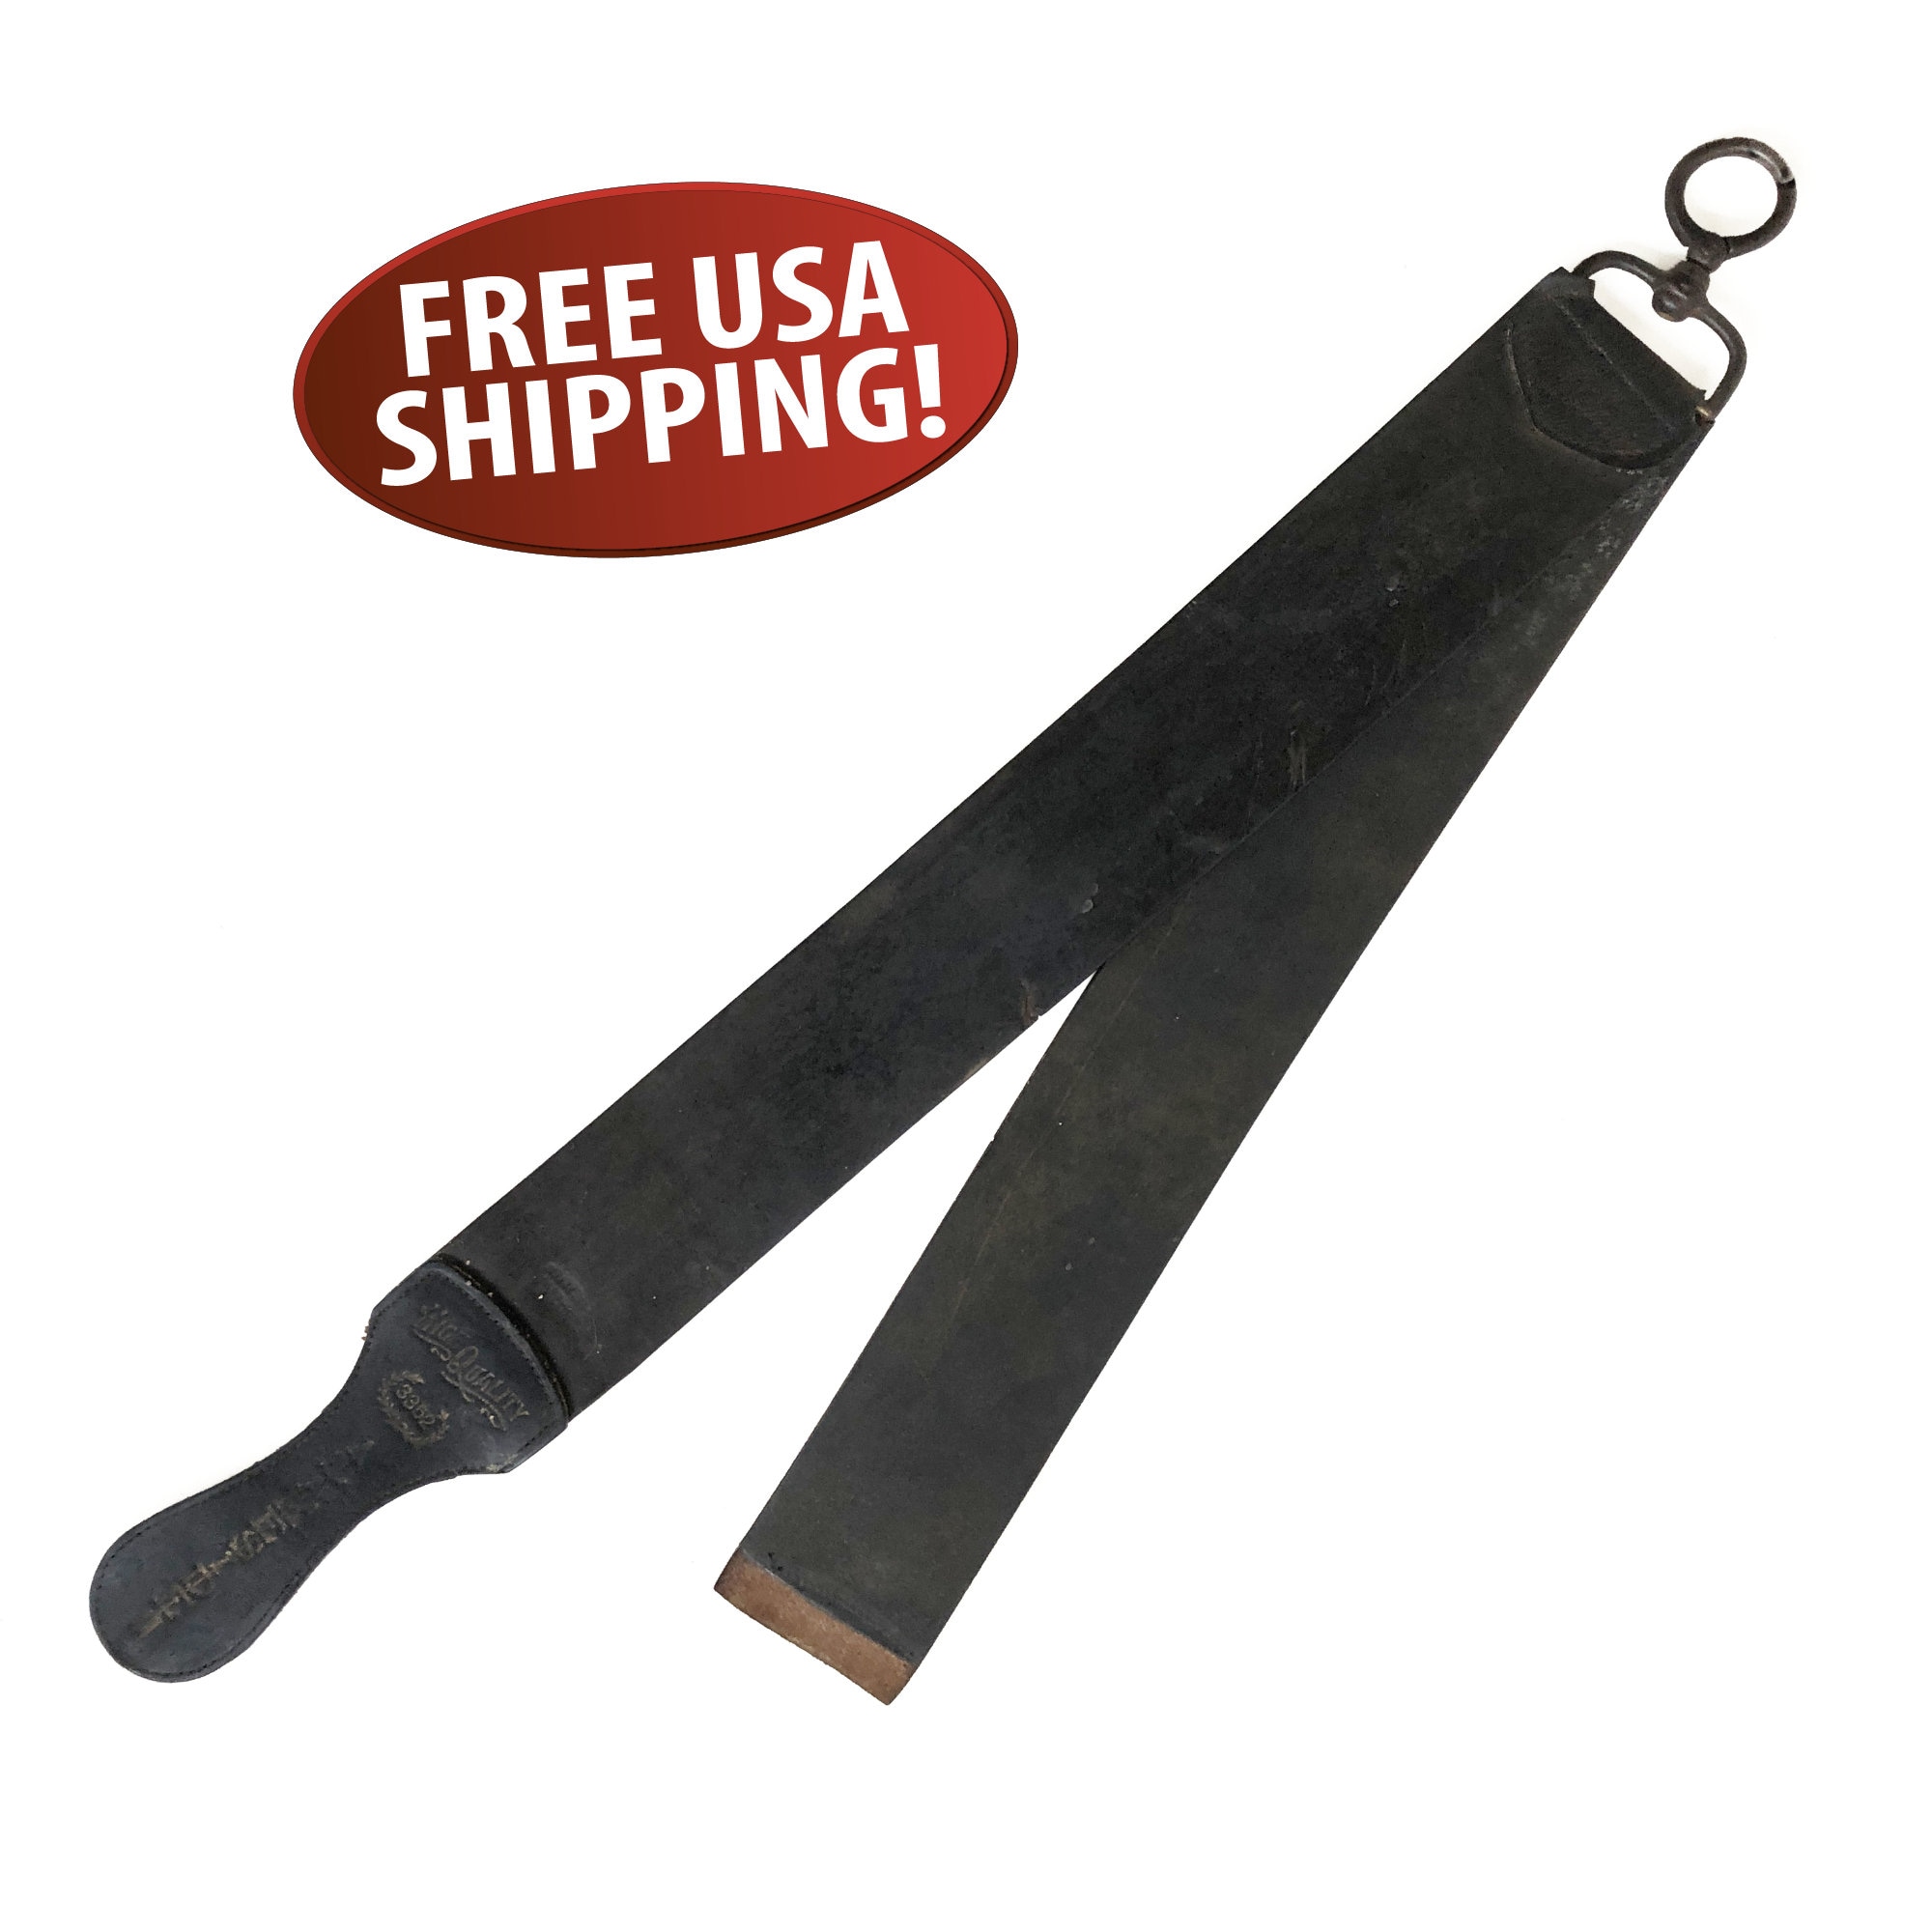 BeaverCraft Leather Paddle Strop 9 x 3 in with Polishing Compound LS1P1 Knife Strop Leather Strops for Sharpening Knives Leather Stropping Block